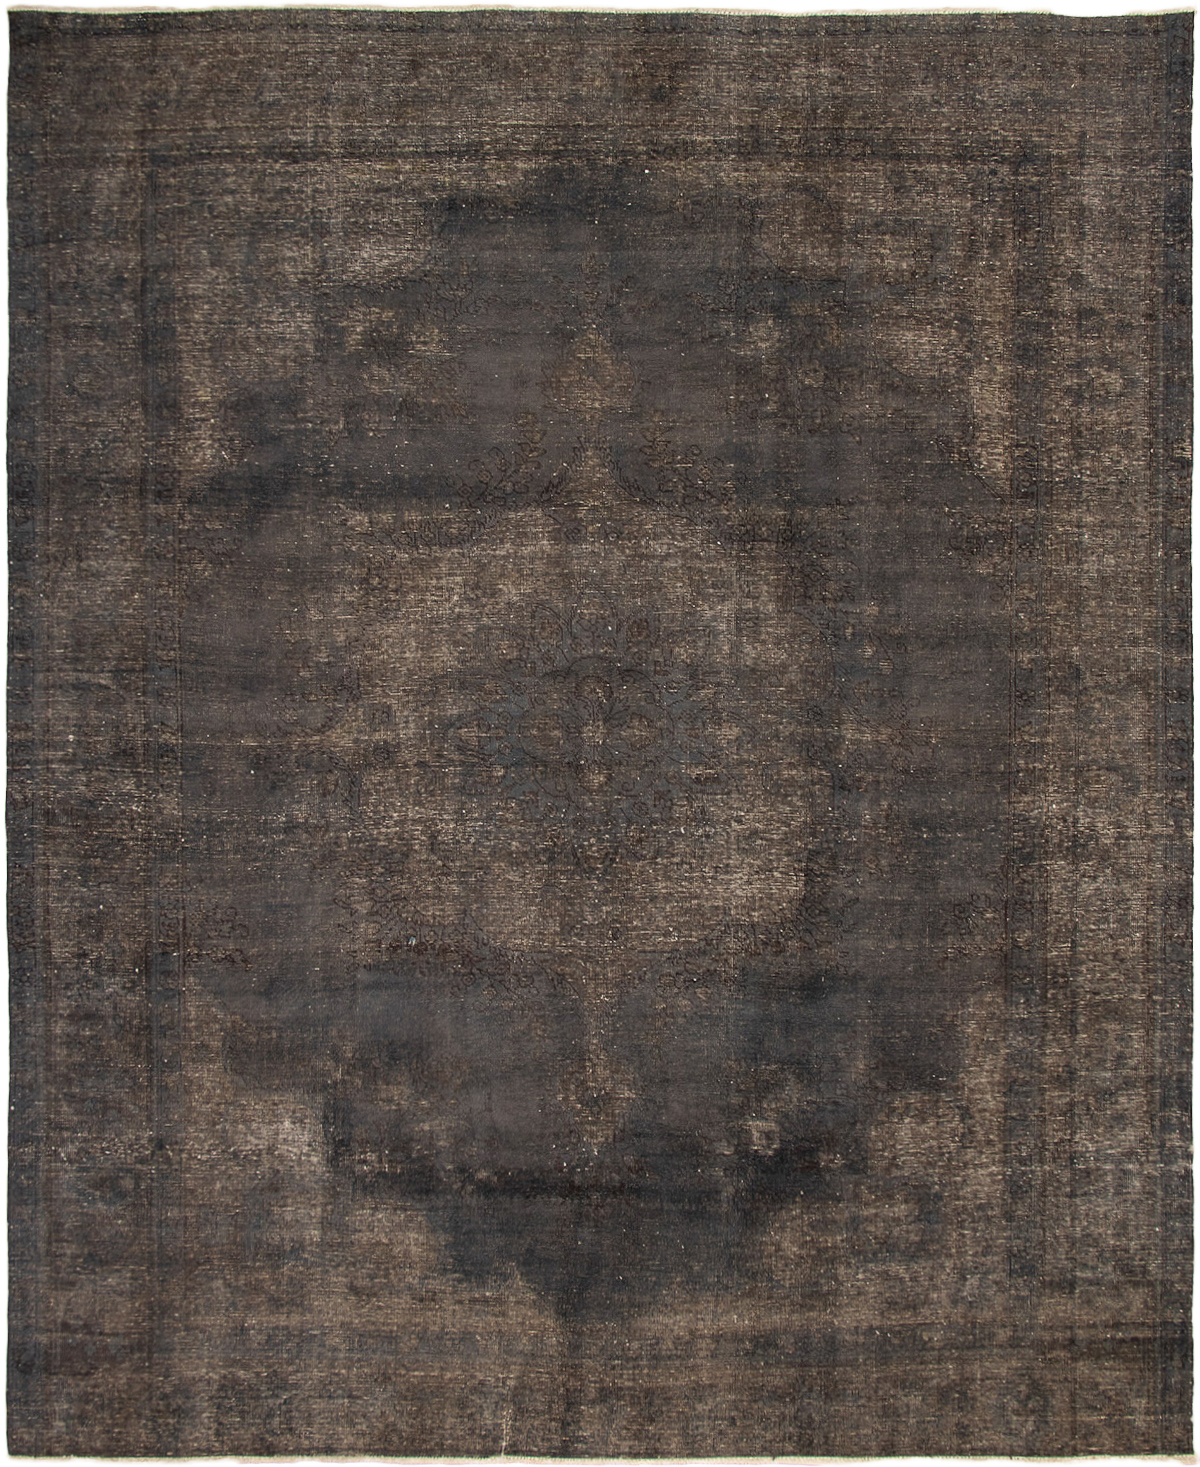 Hand-knotted Color Transition Dark Grey Wool Rug 9'9" x 12'1" Size: 9'9" x 12'1"  